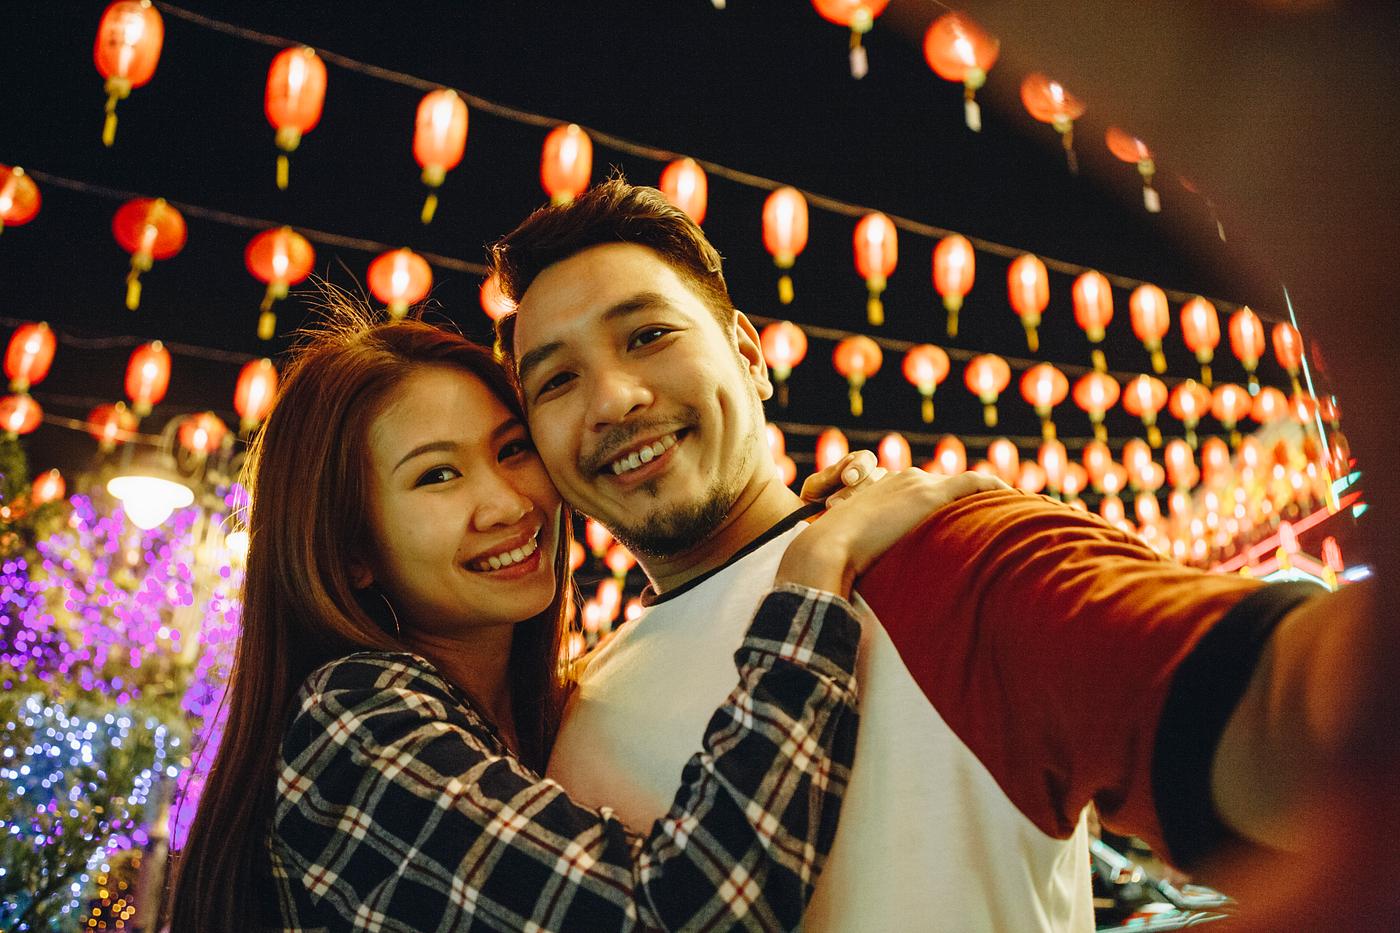 Download Asian couple at Chinese festival | Royalty free stock ...